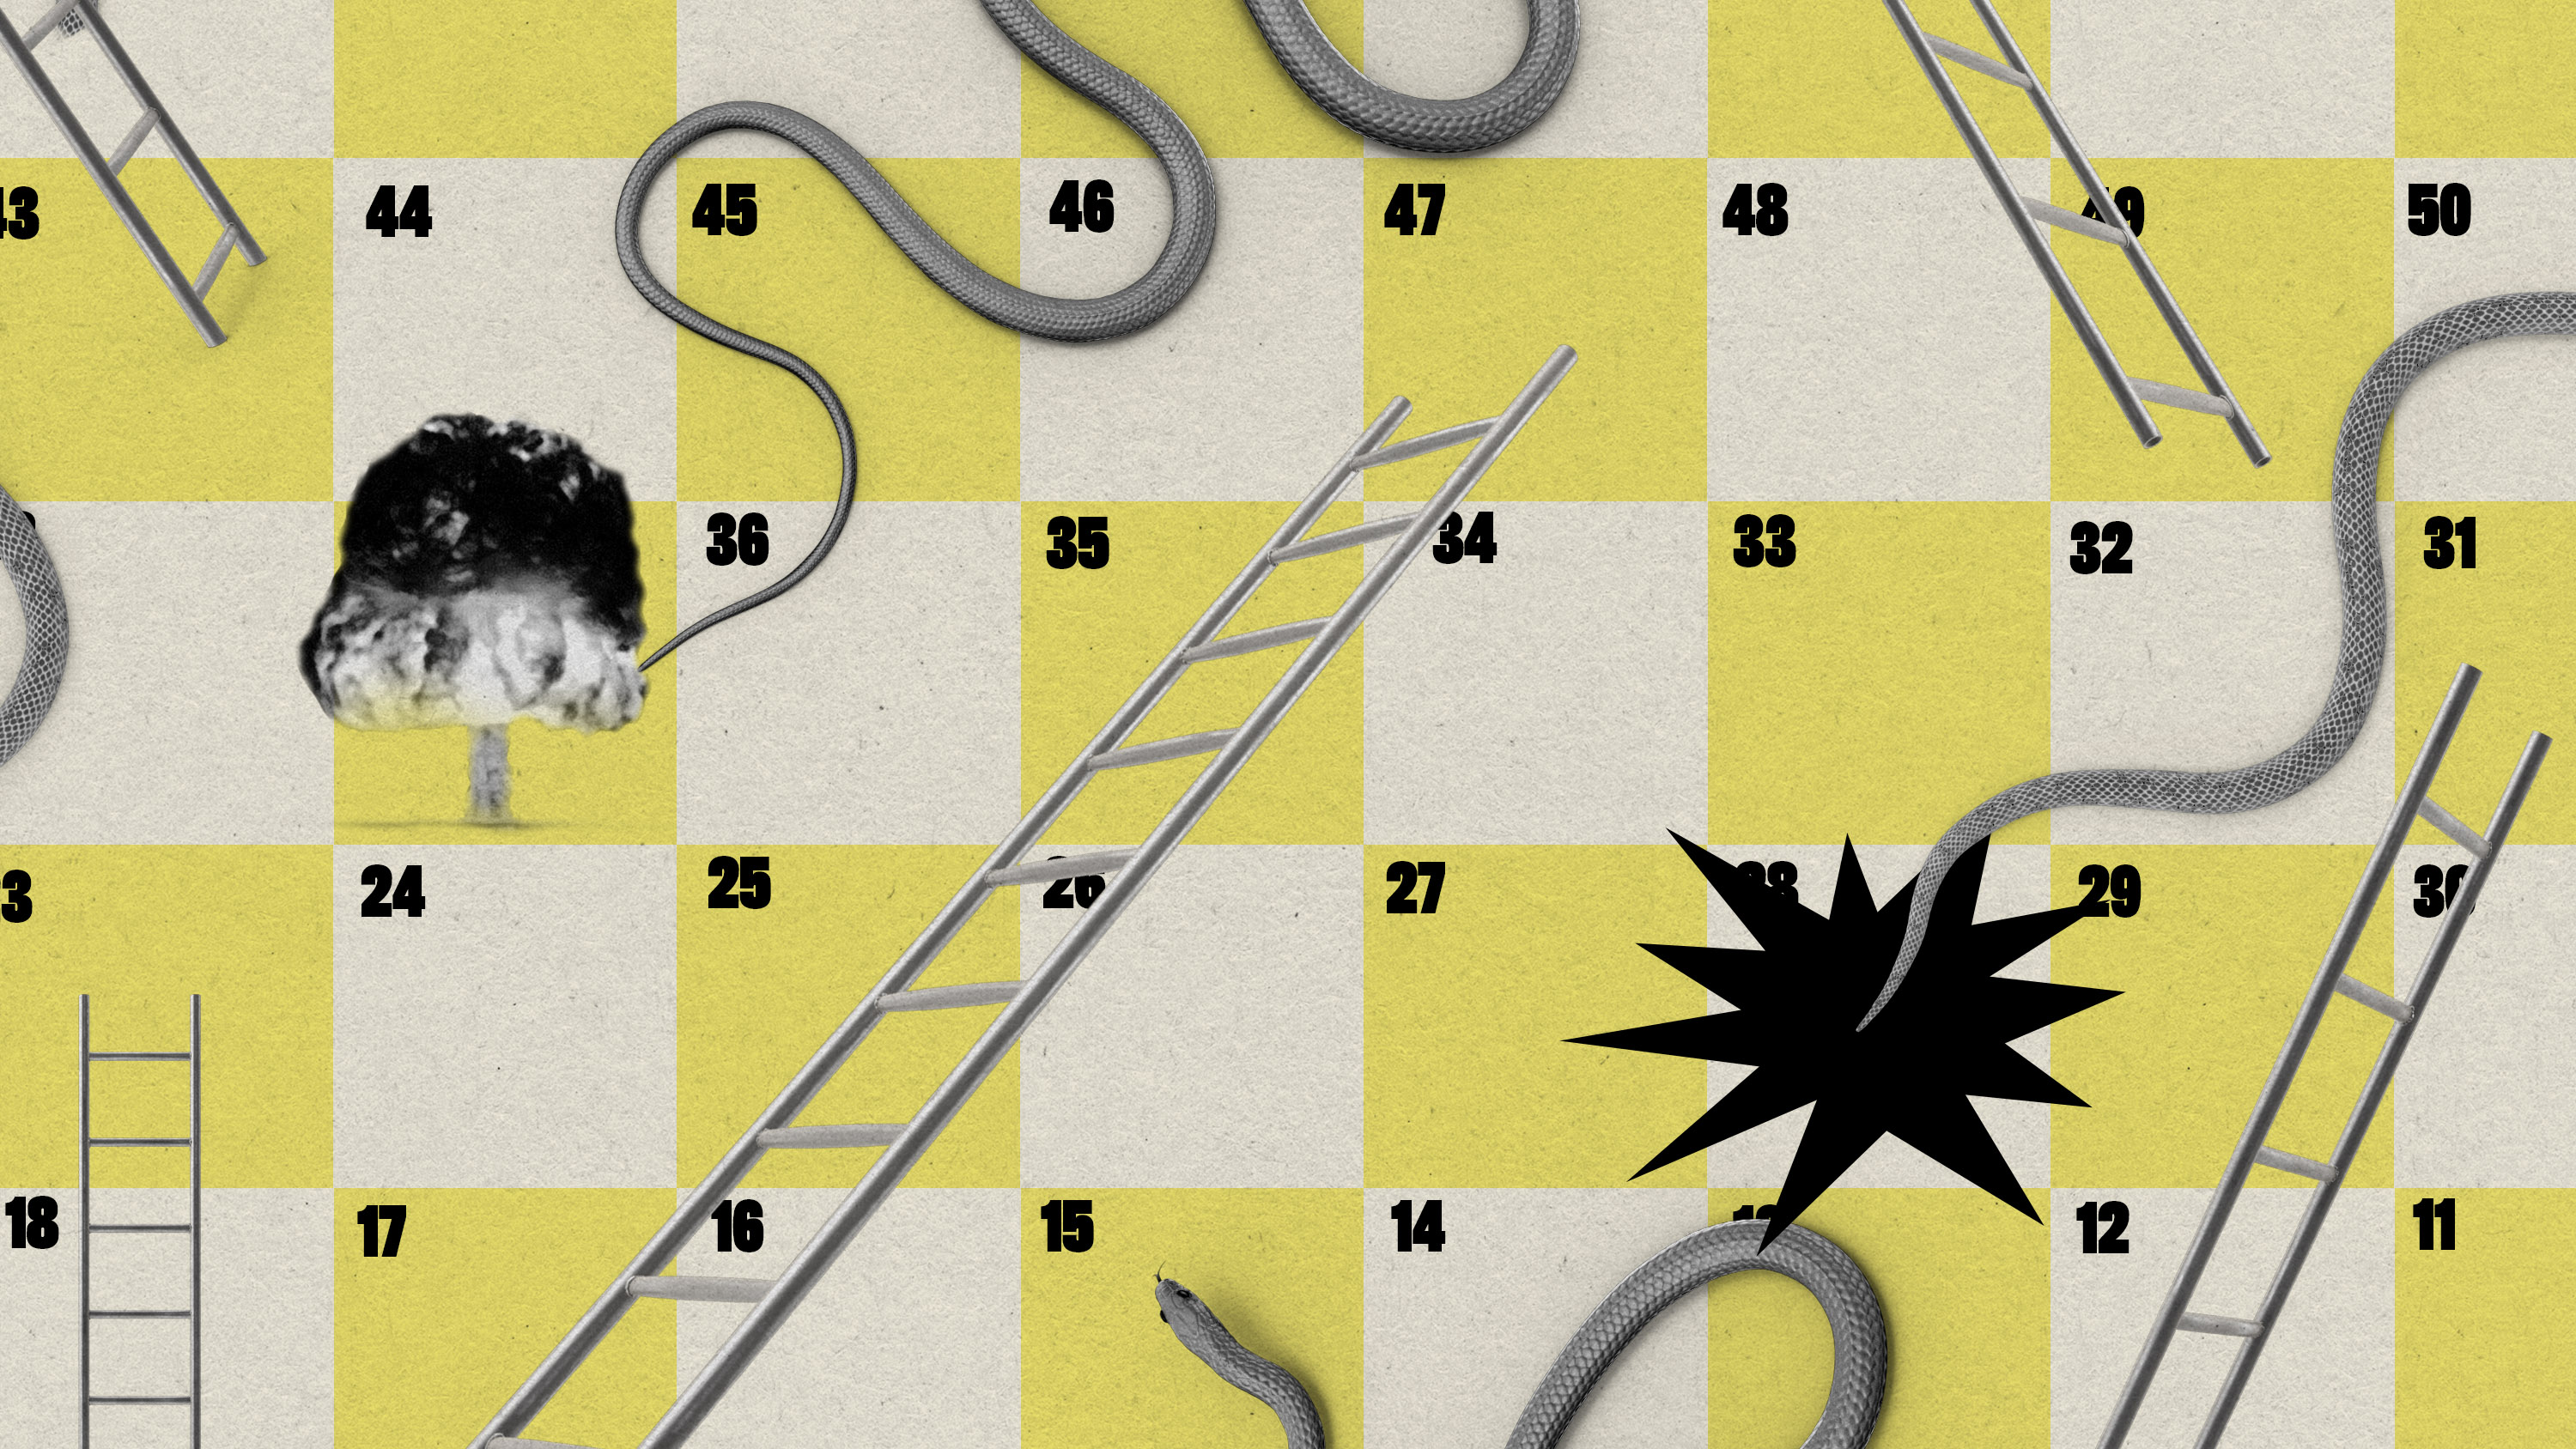 a game of snakes and ladders with explosions as the bad outcomes